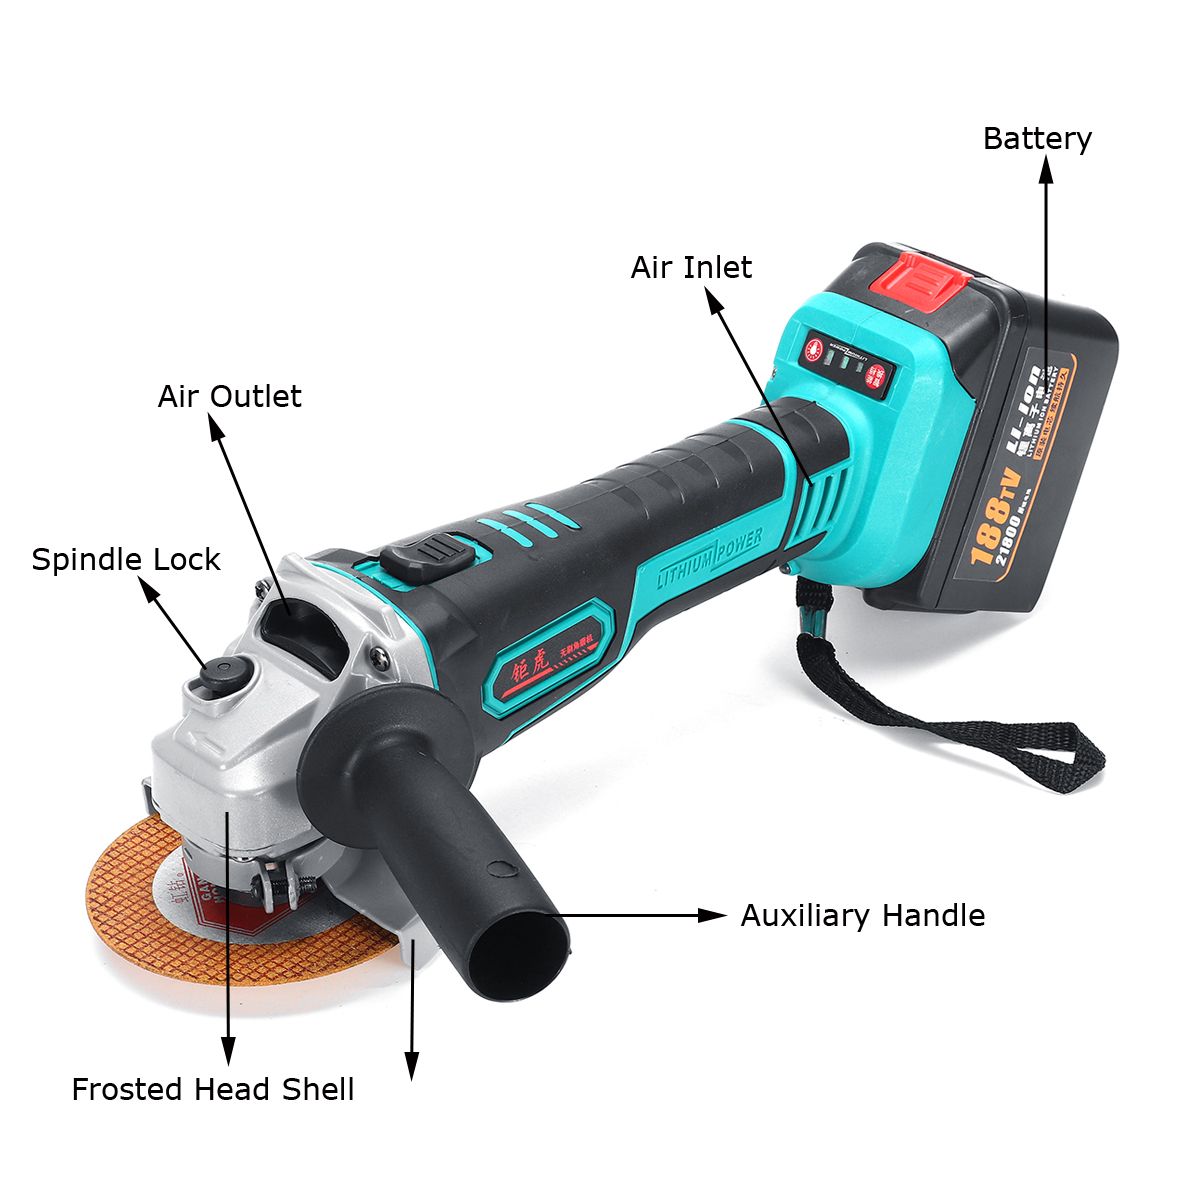 218TV-29800mAh-600W-12000rmin-Cordless-Electric-Angle-Grinder-Power-Cutting-Tool-with-3-125mm-Cuttin-1641209